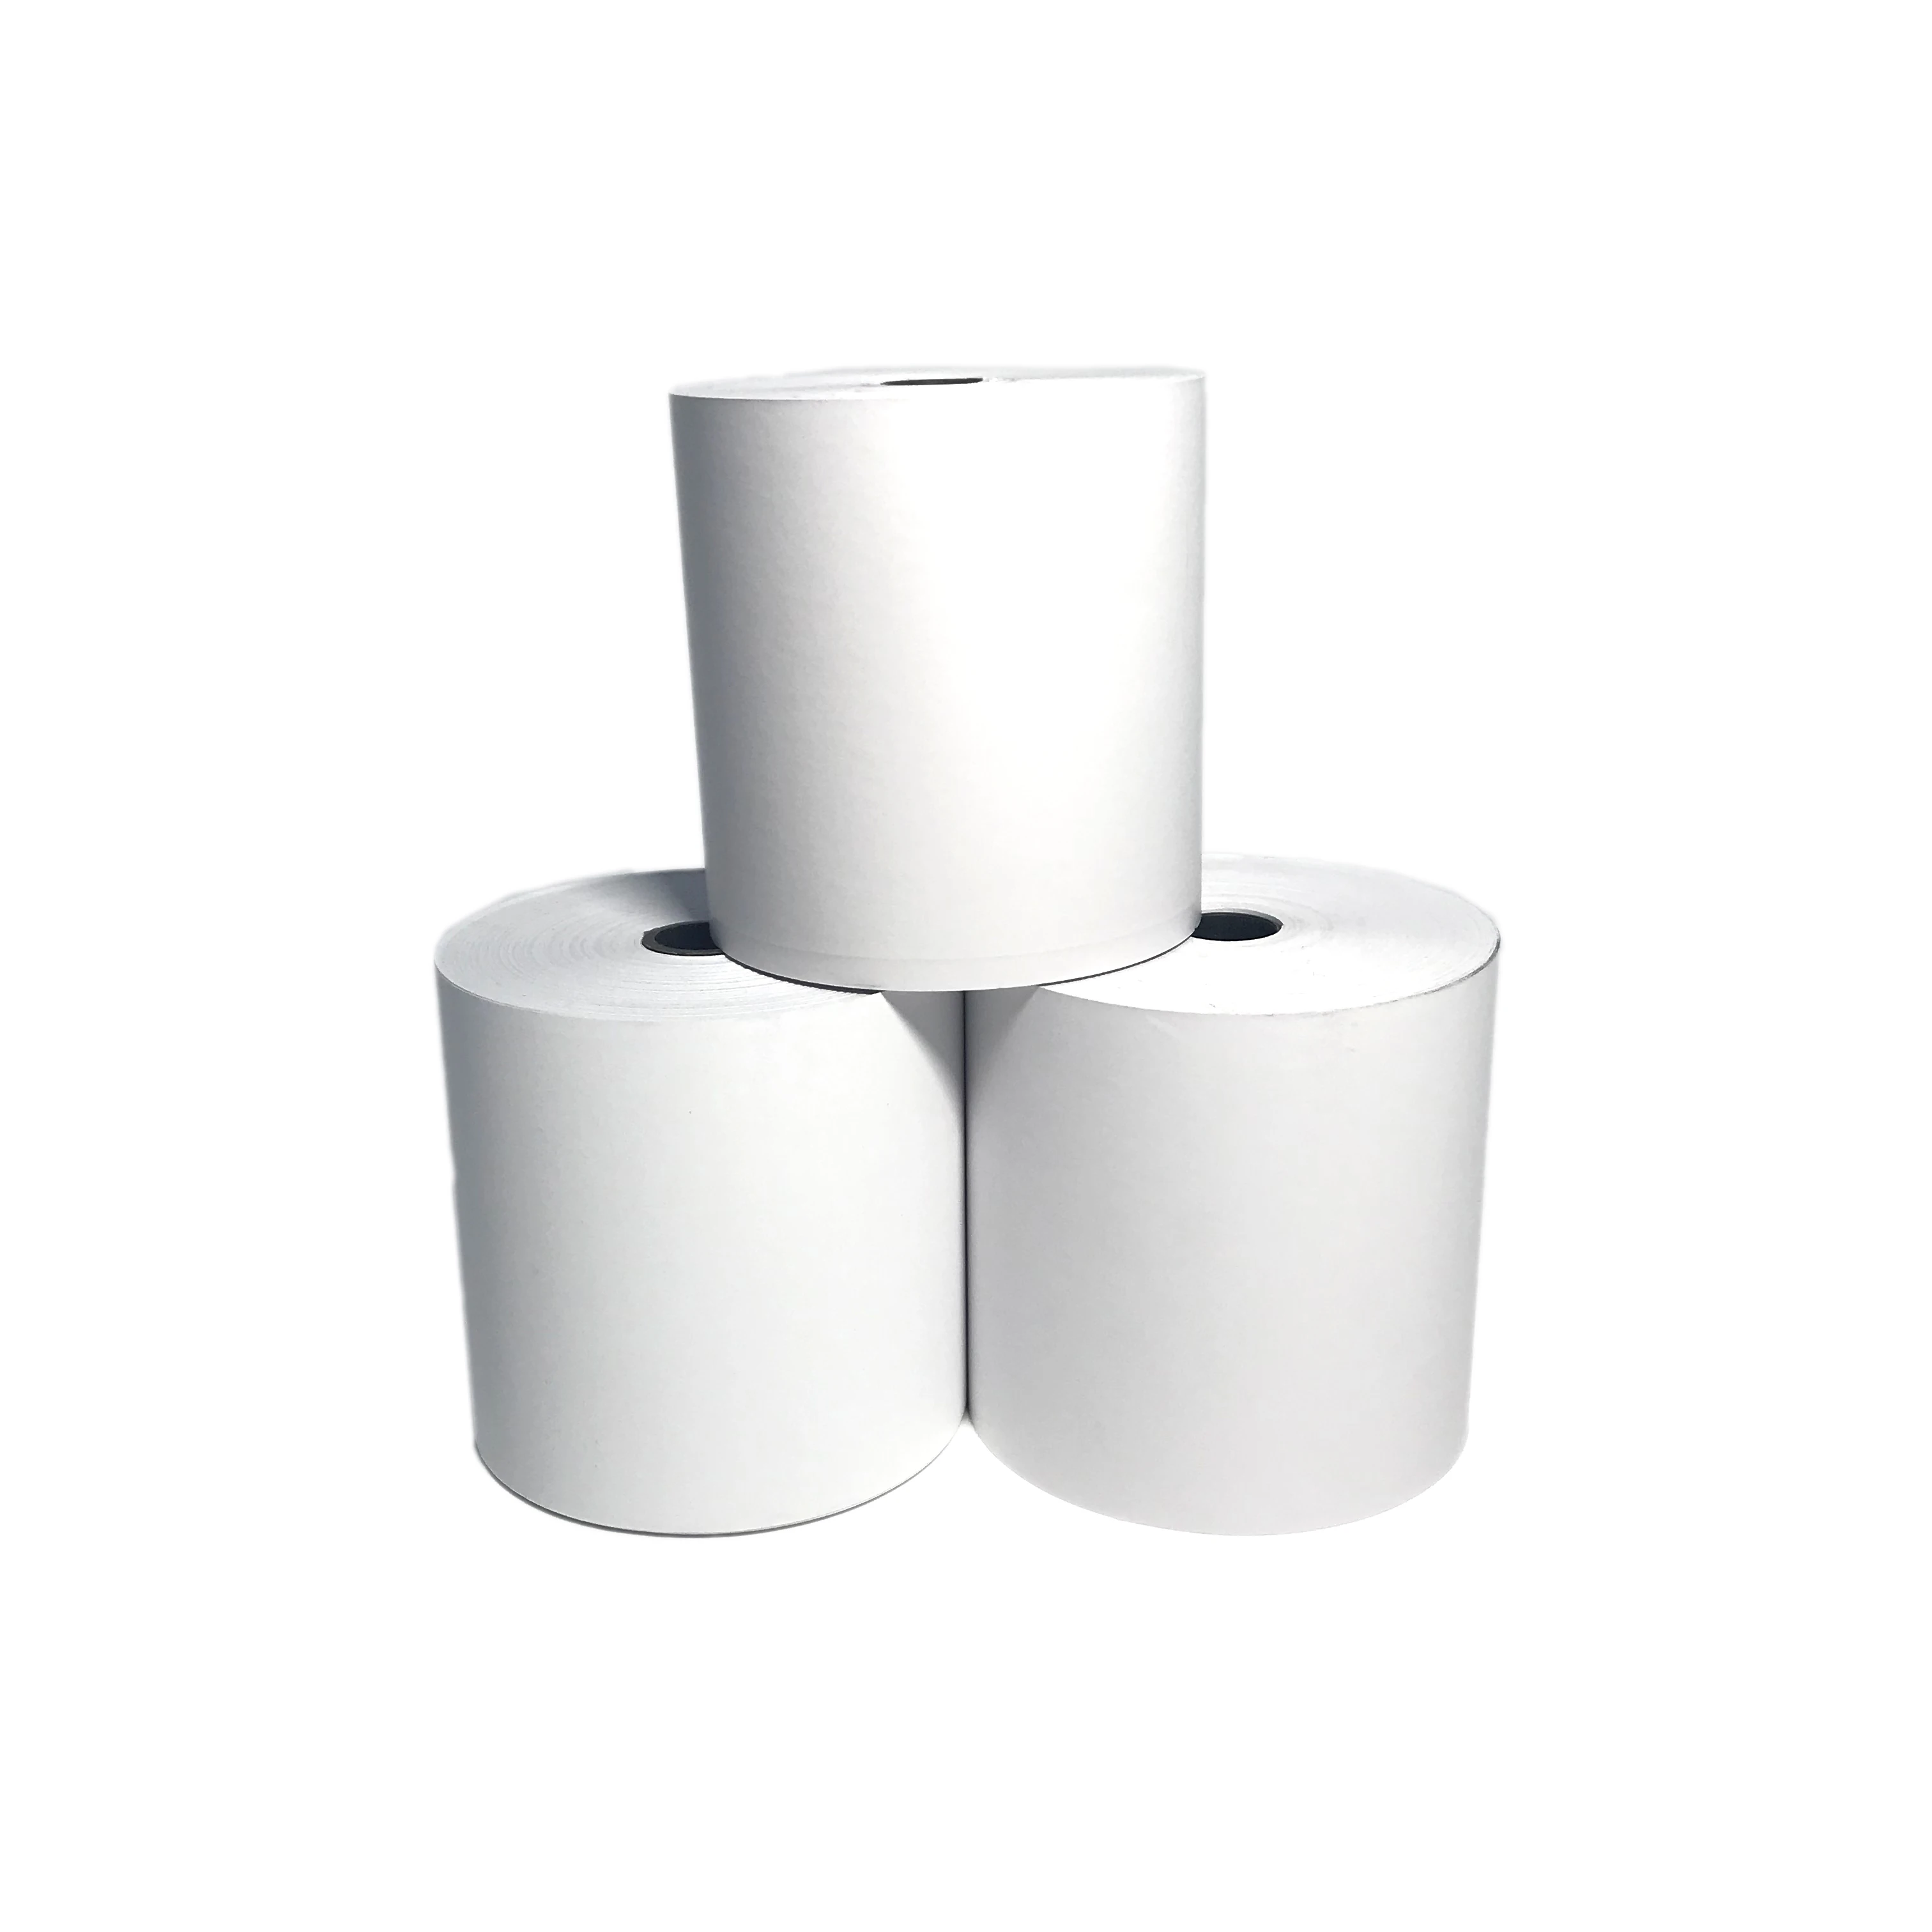 80X80mm thermal pos paper rolls